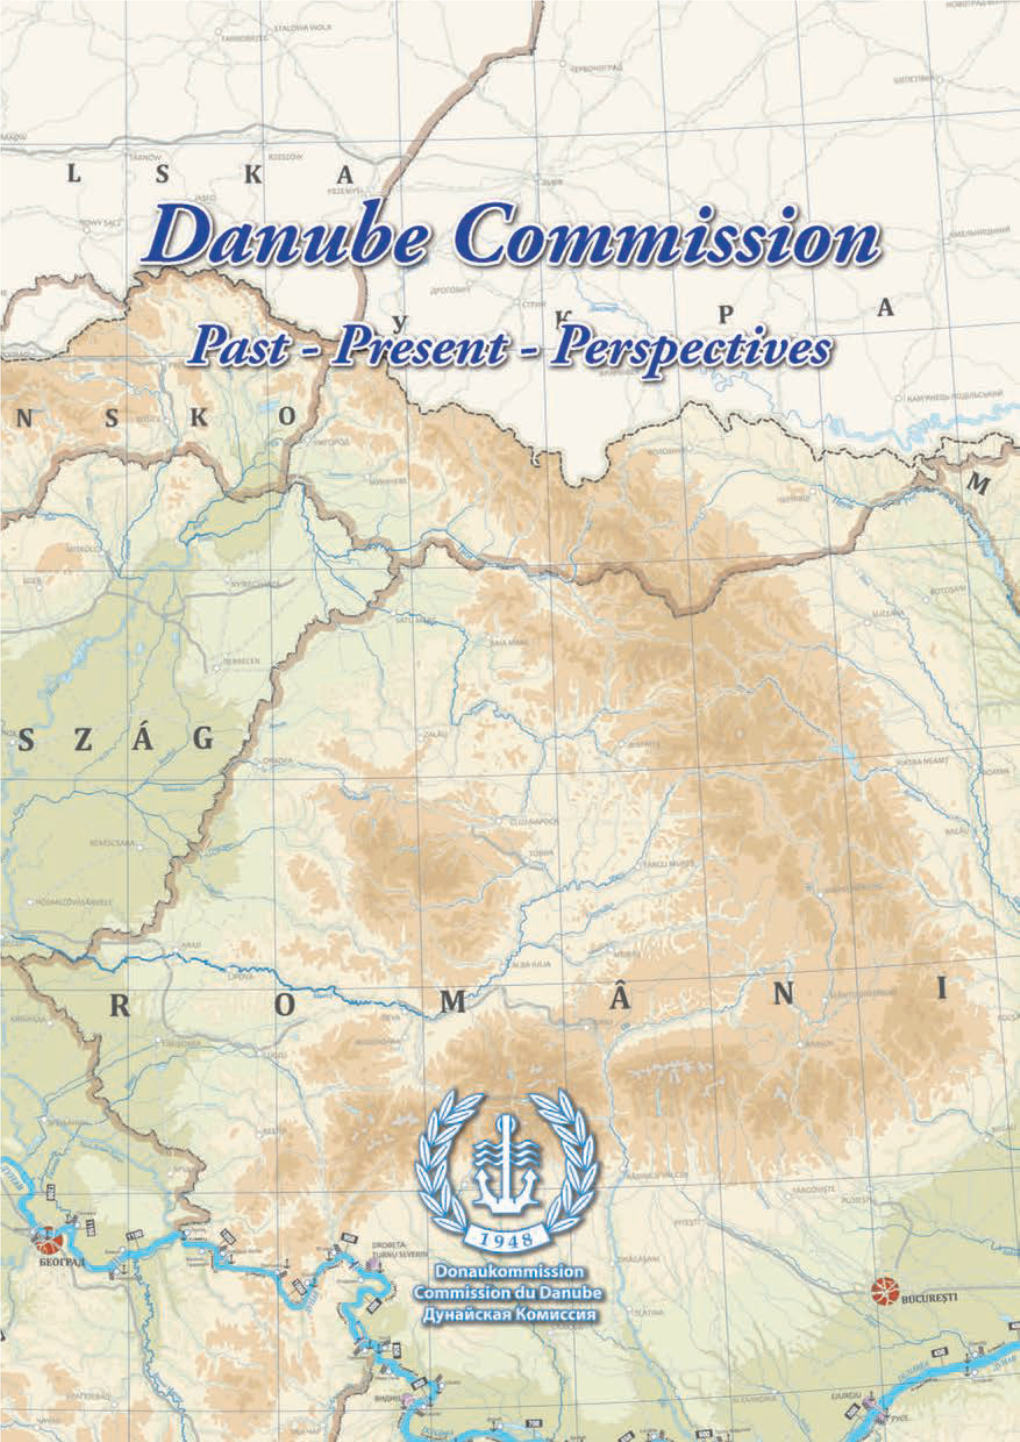 Leaflet of the Danube Commission